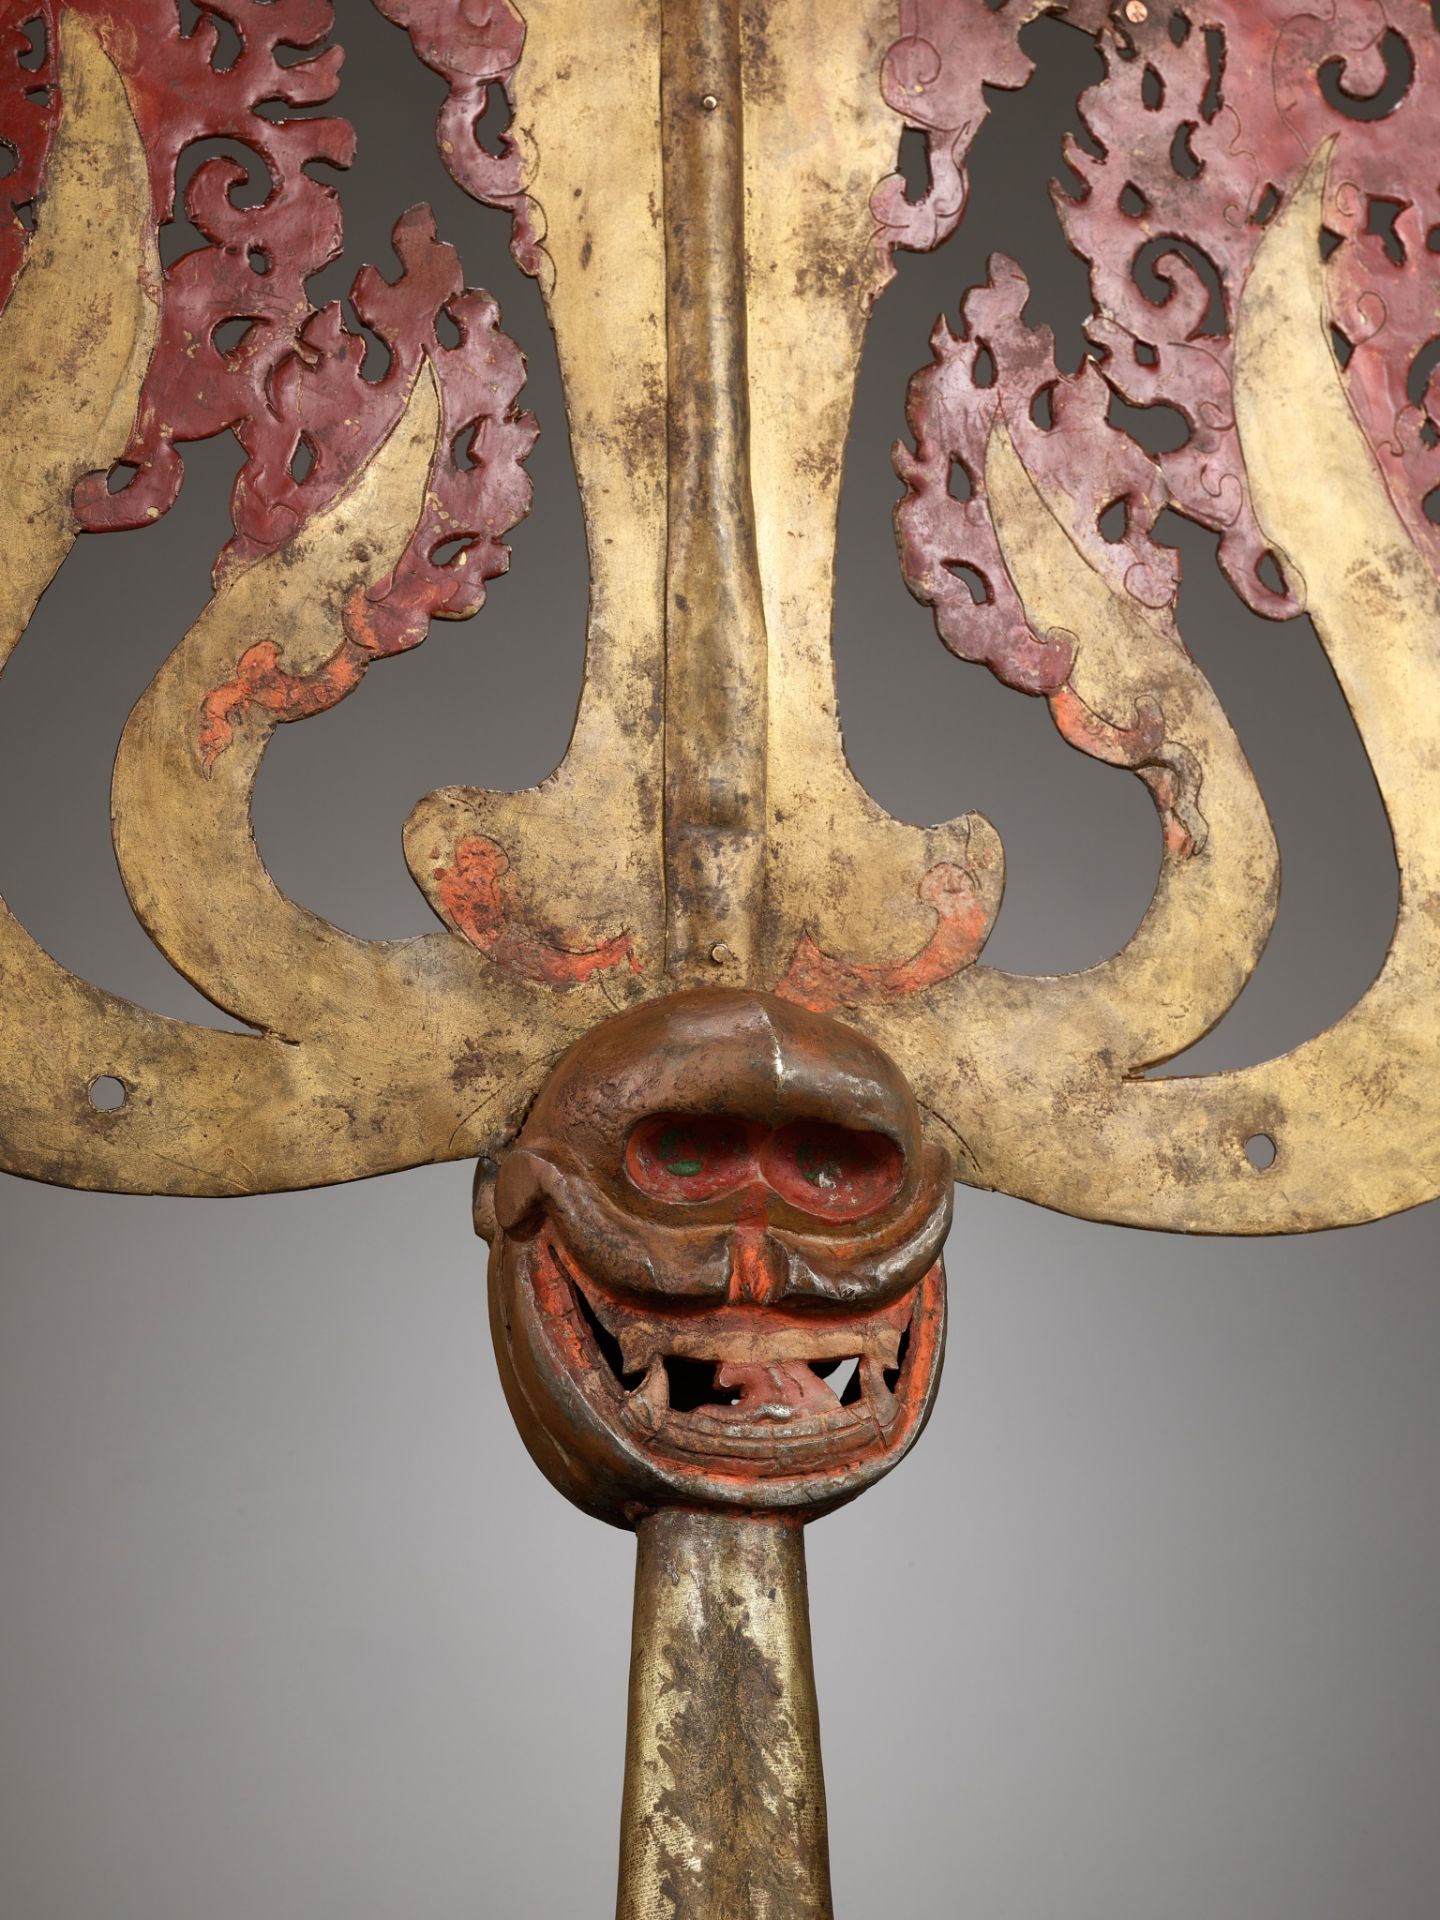 A LARGE LACQUERED AND GILT COPPER-ALLOY TRISHULA FITTING, TIBET, 17TH - 18TH CENTURY